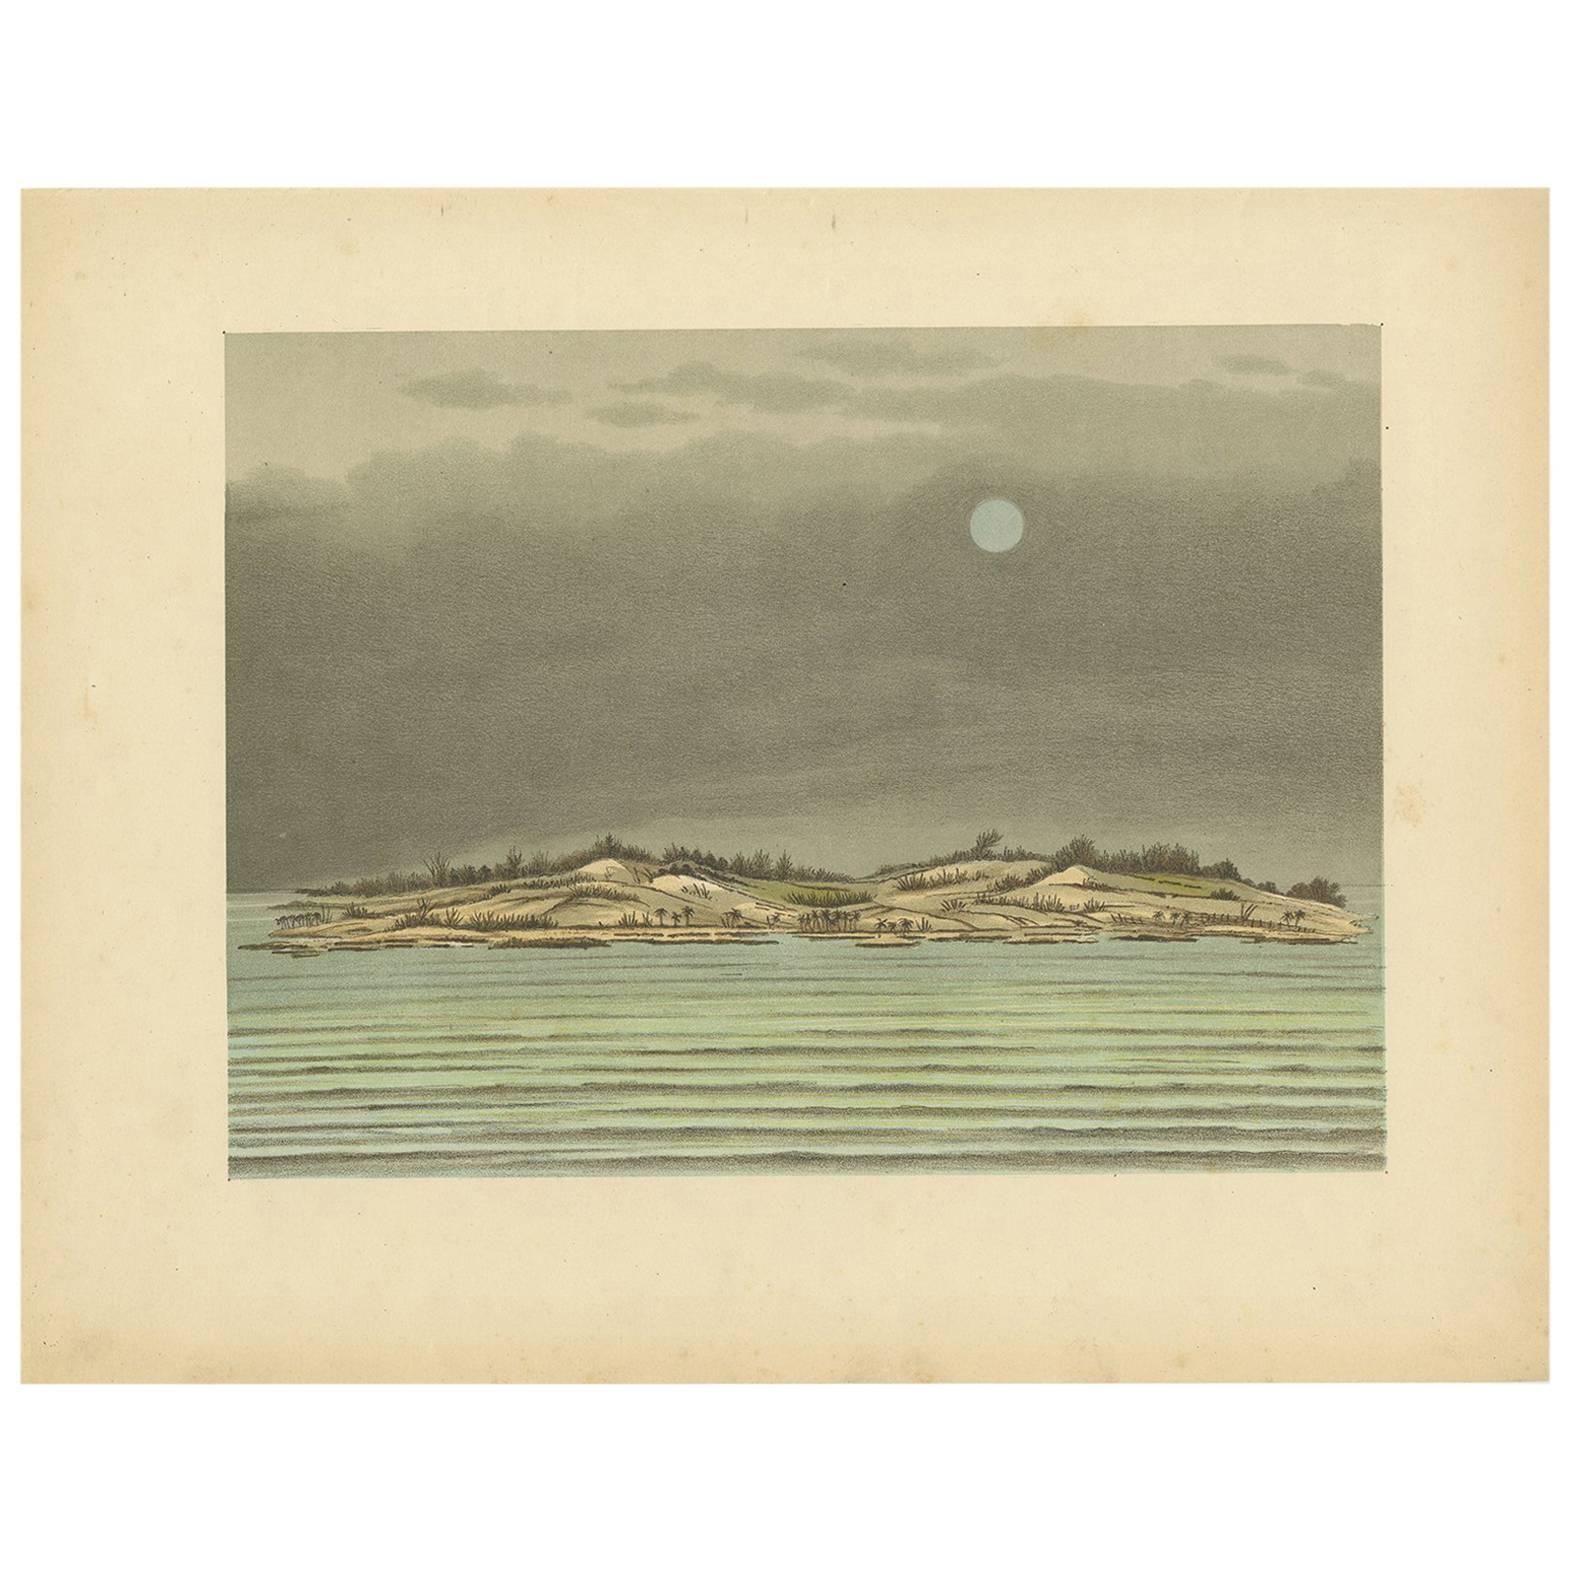 Antique Print of Tanjung Belimbing by M.T.H. Perelaer, 1888 For Sale